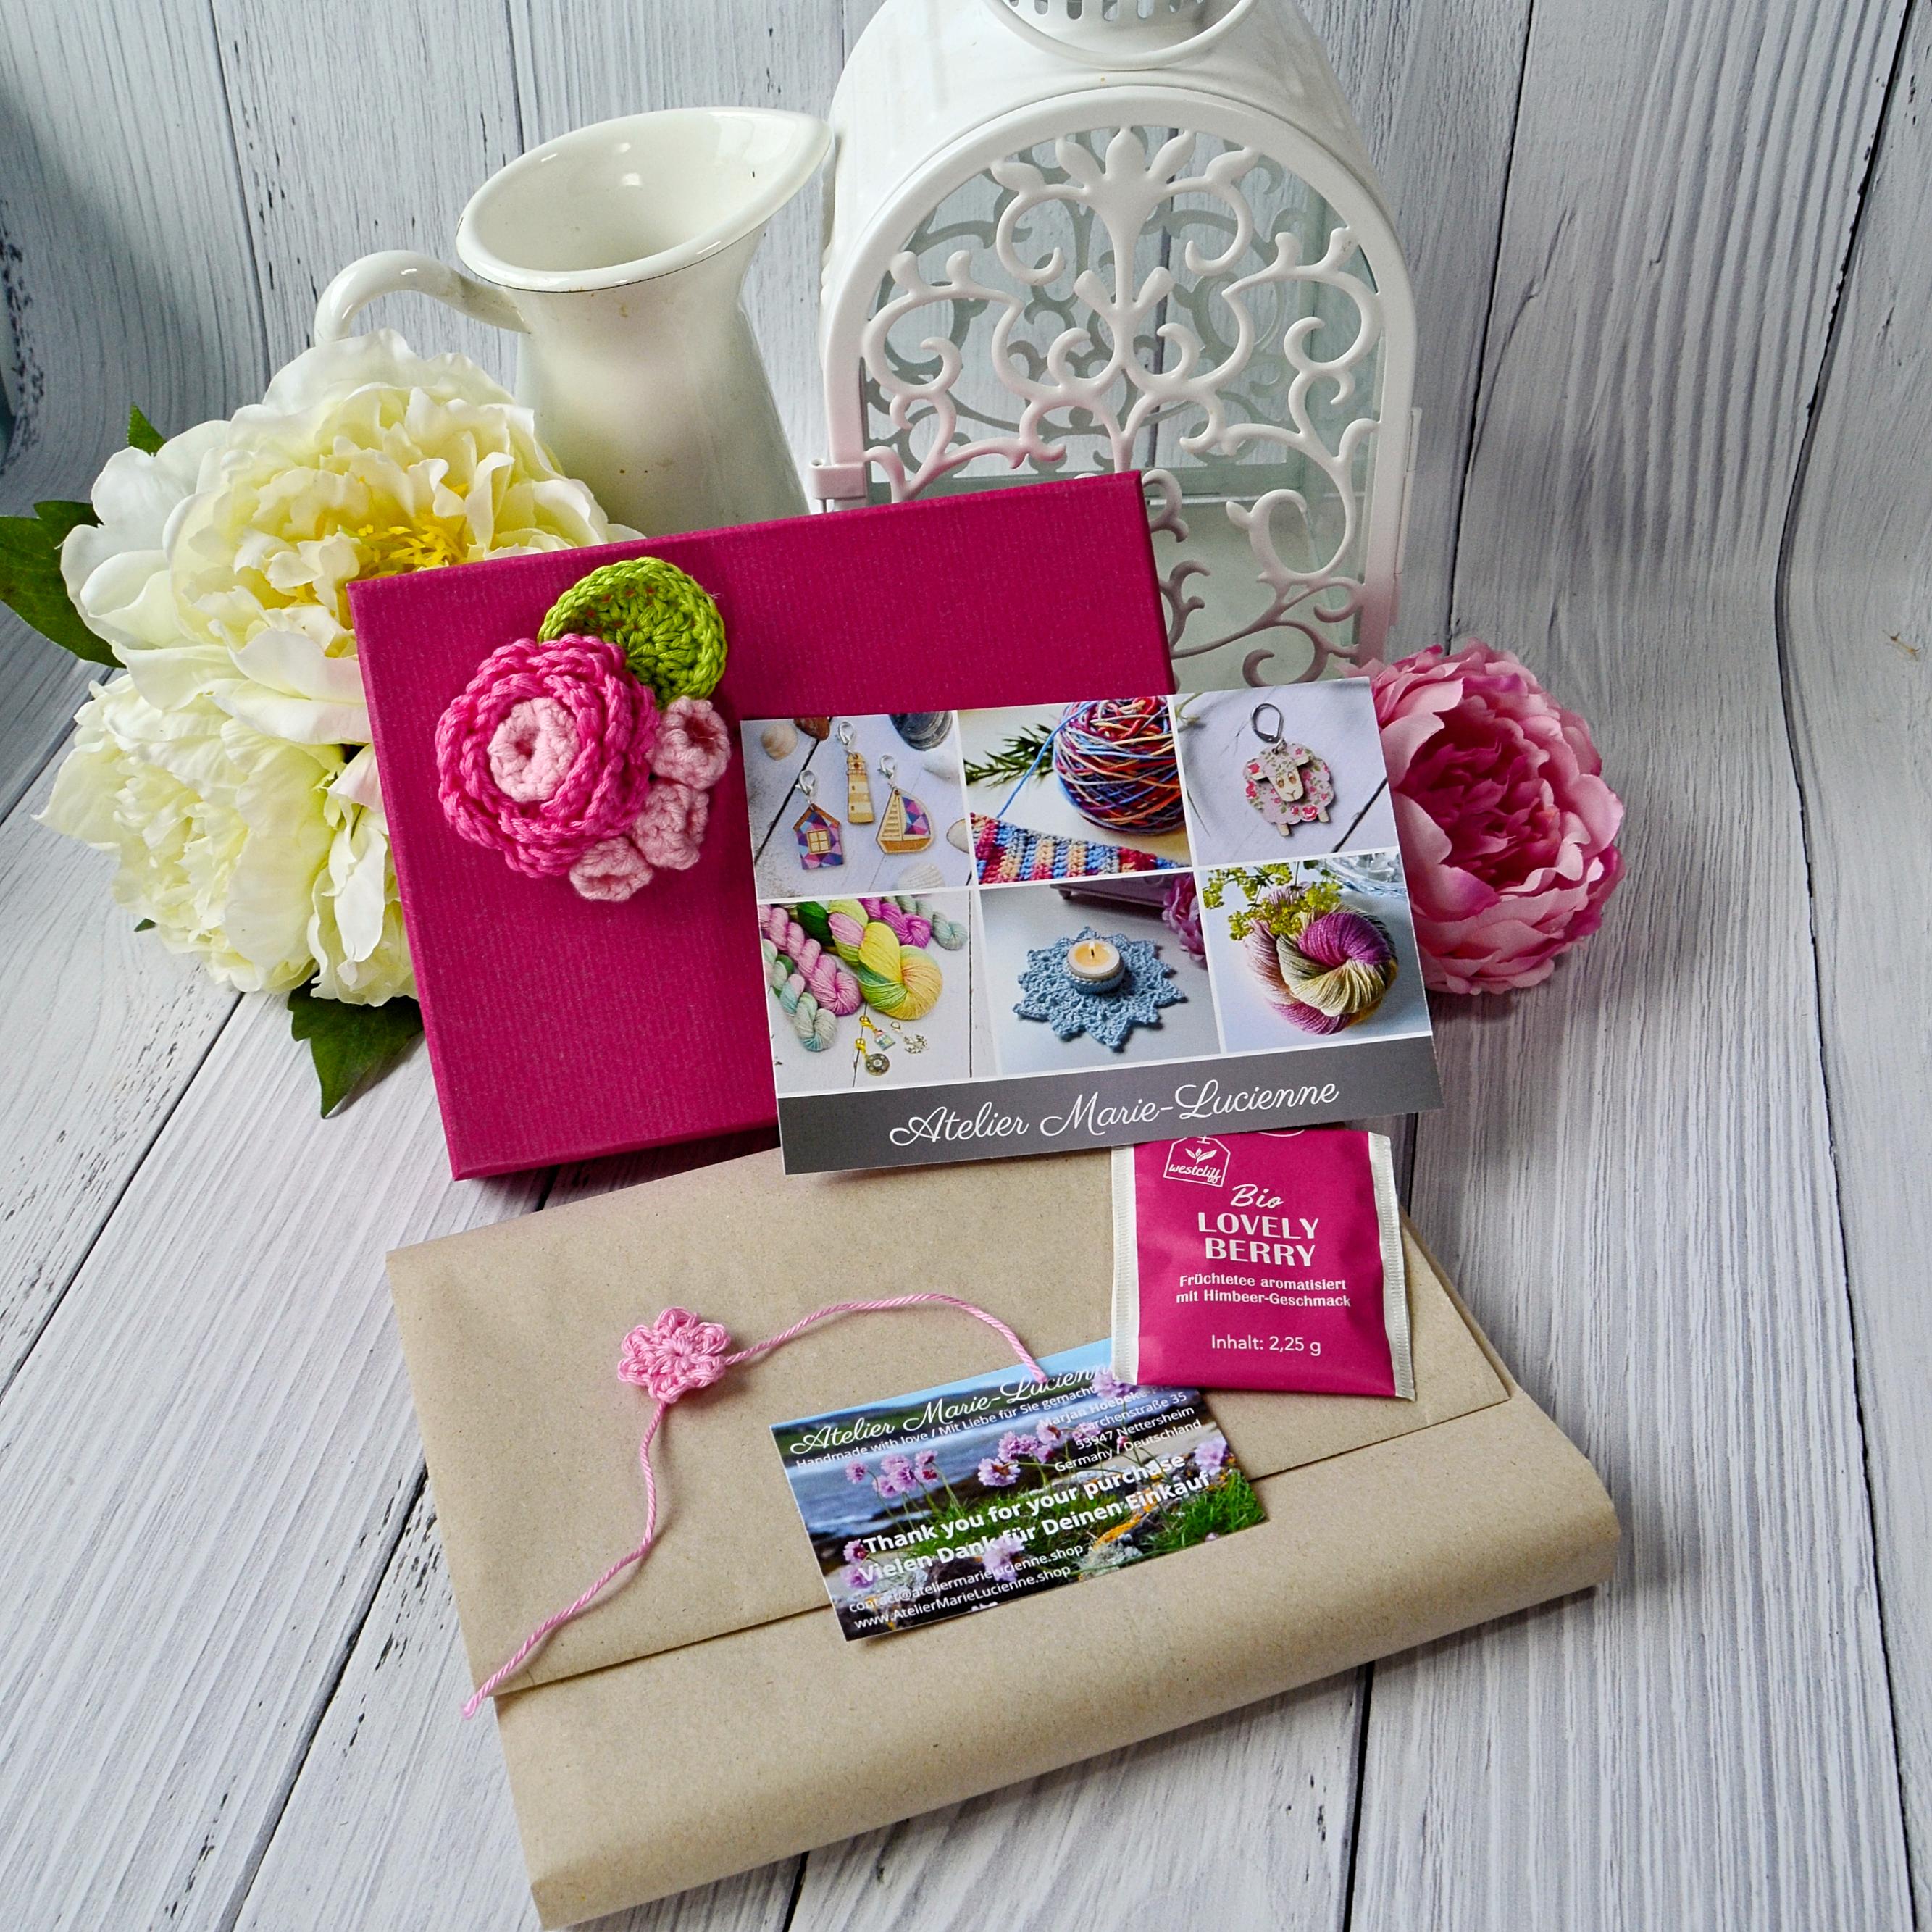 Welcome gift pack in pink with contents fully wrapped in front of it